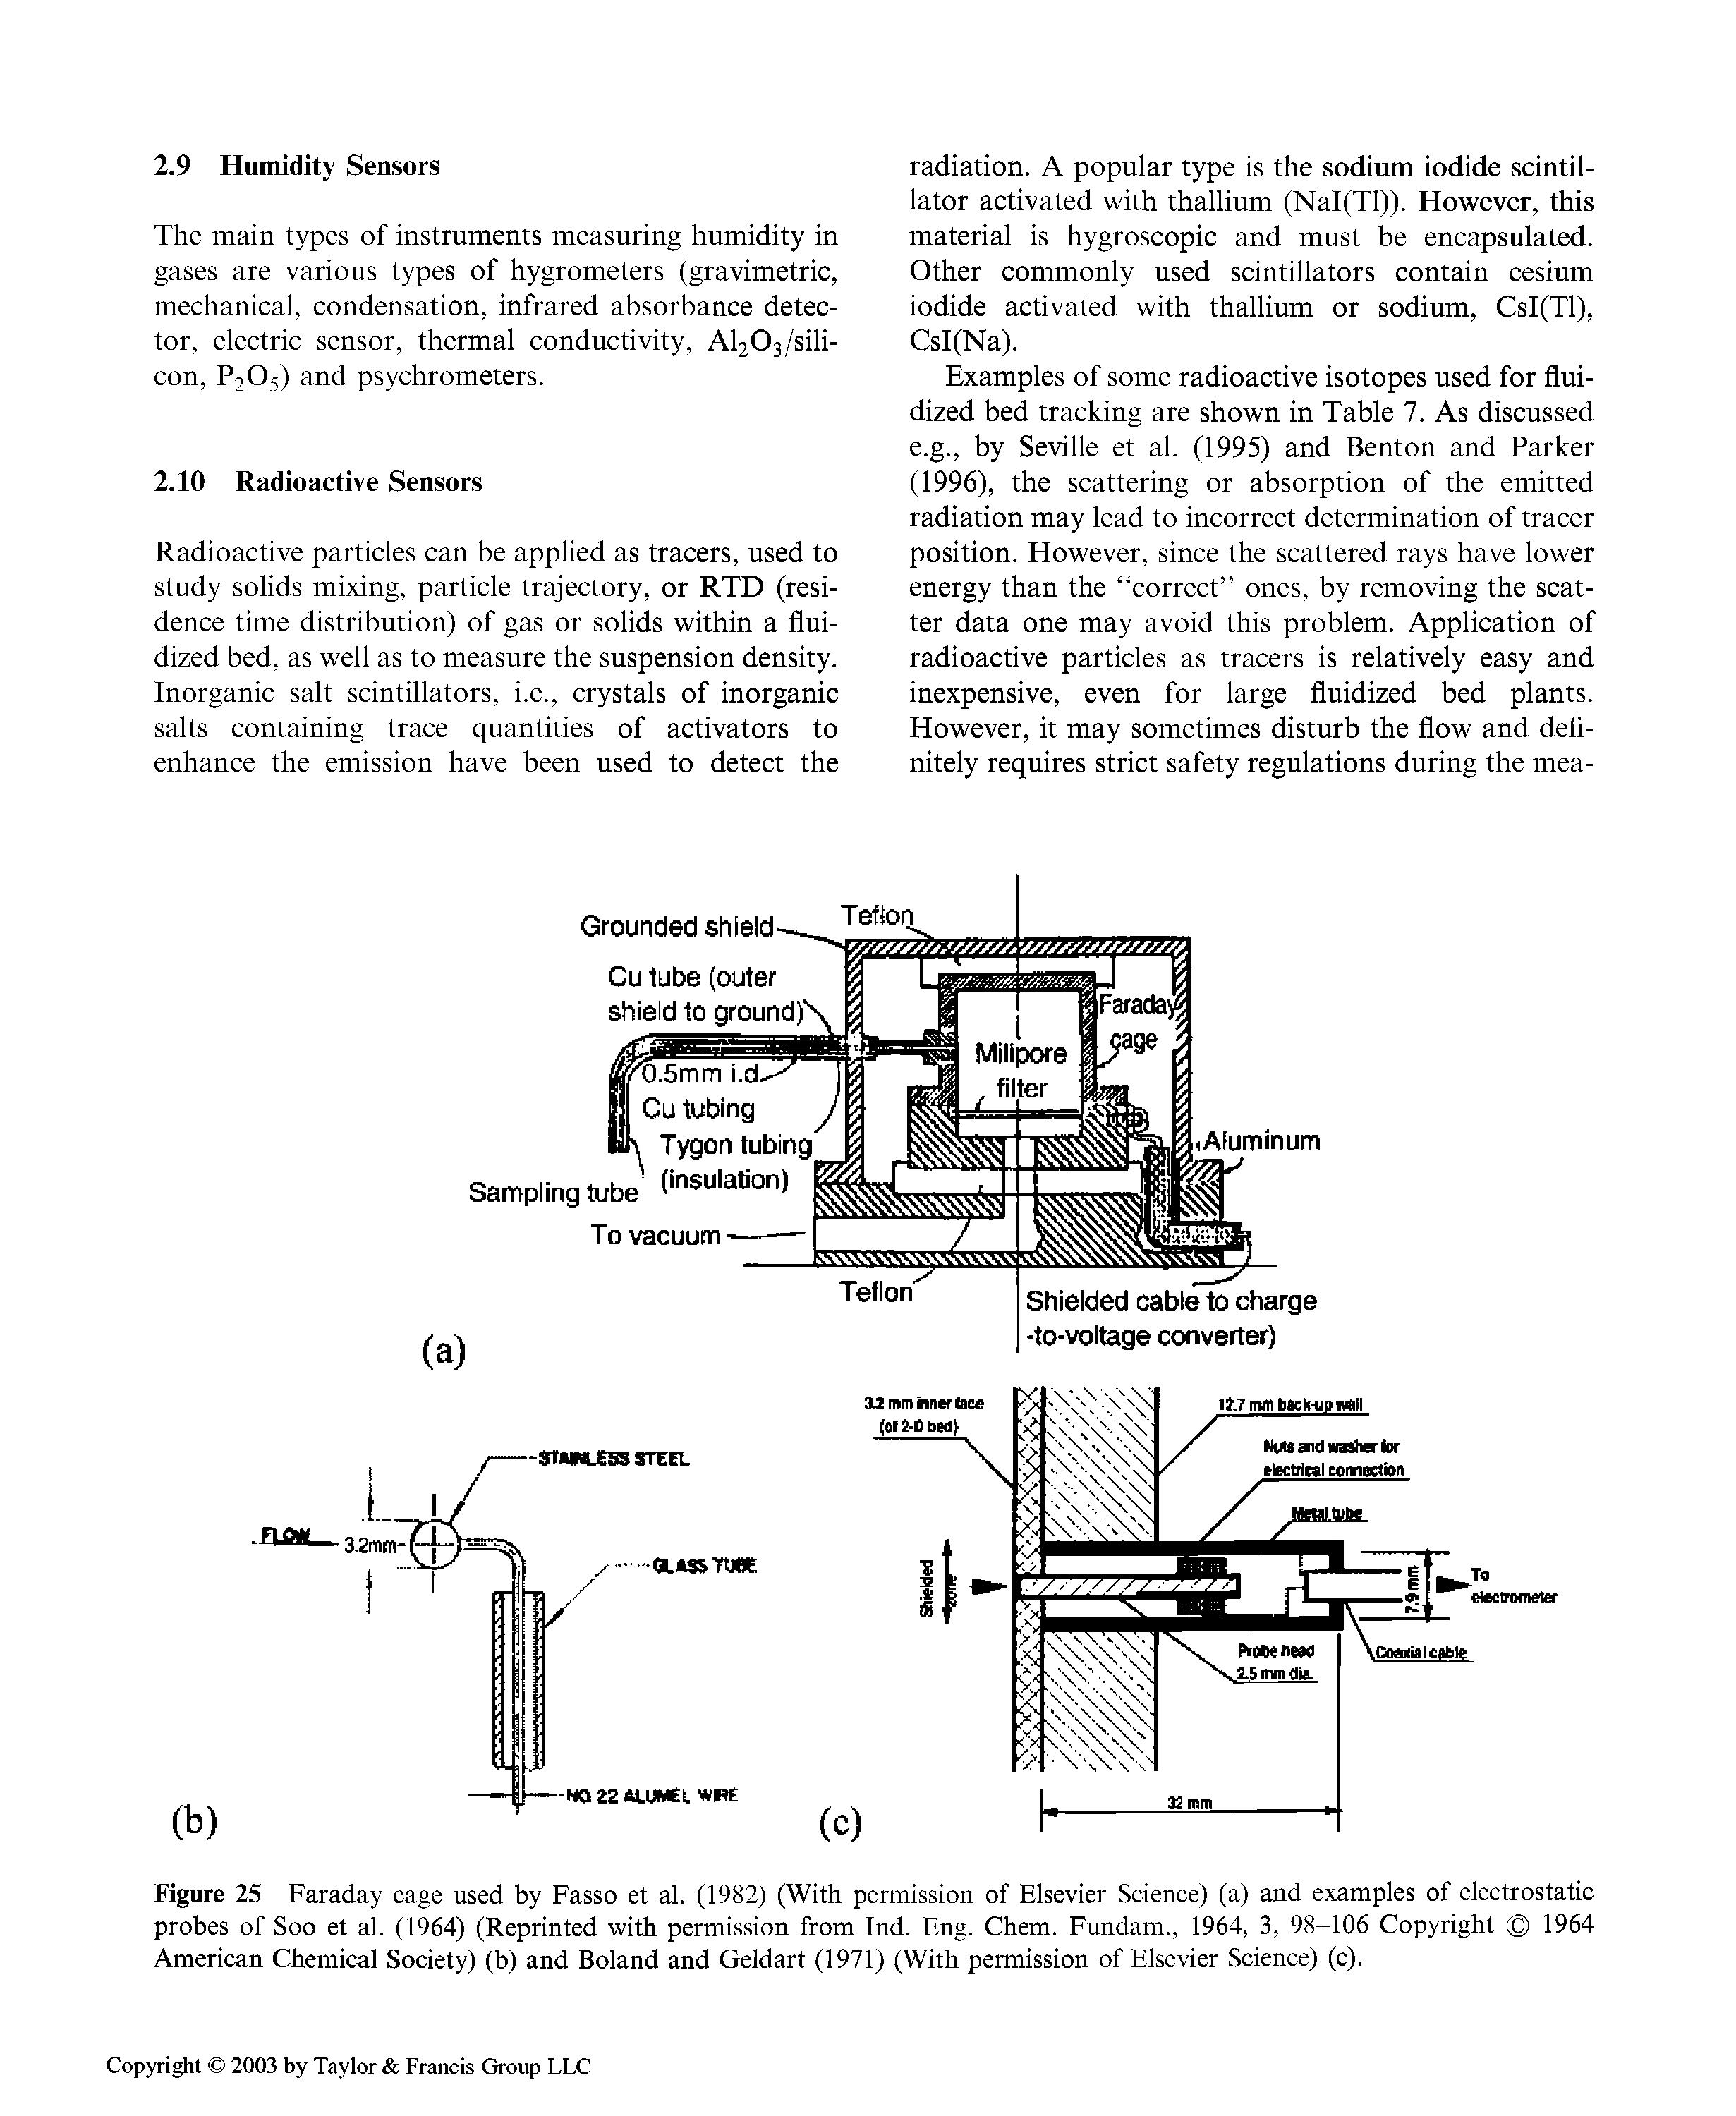 Figure 25 Faraday cage used by Fasso et al. (1982) (With permission of Elsevier Science) (a) and examples of electrostatic probes of Soo et al. (1964) (Reprinted with permission from Ind. Eng. Chem. Fundam., 1964, 3, 98-106 Copyright 1964 American Chemical Society) (b) and Boland and Geldart (1971) (With permission of Elsevier Science) (c).